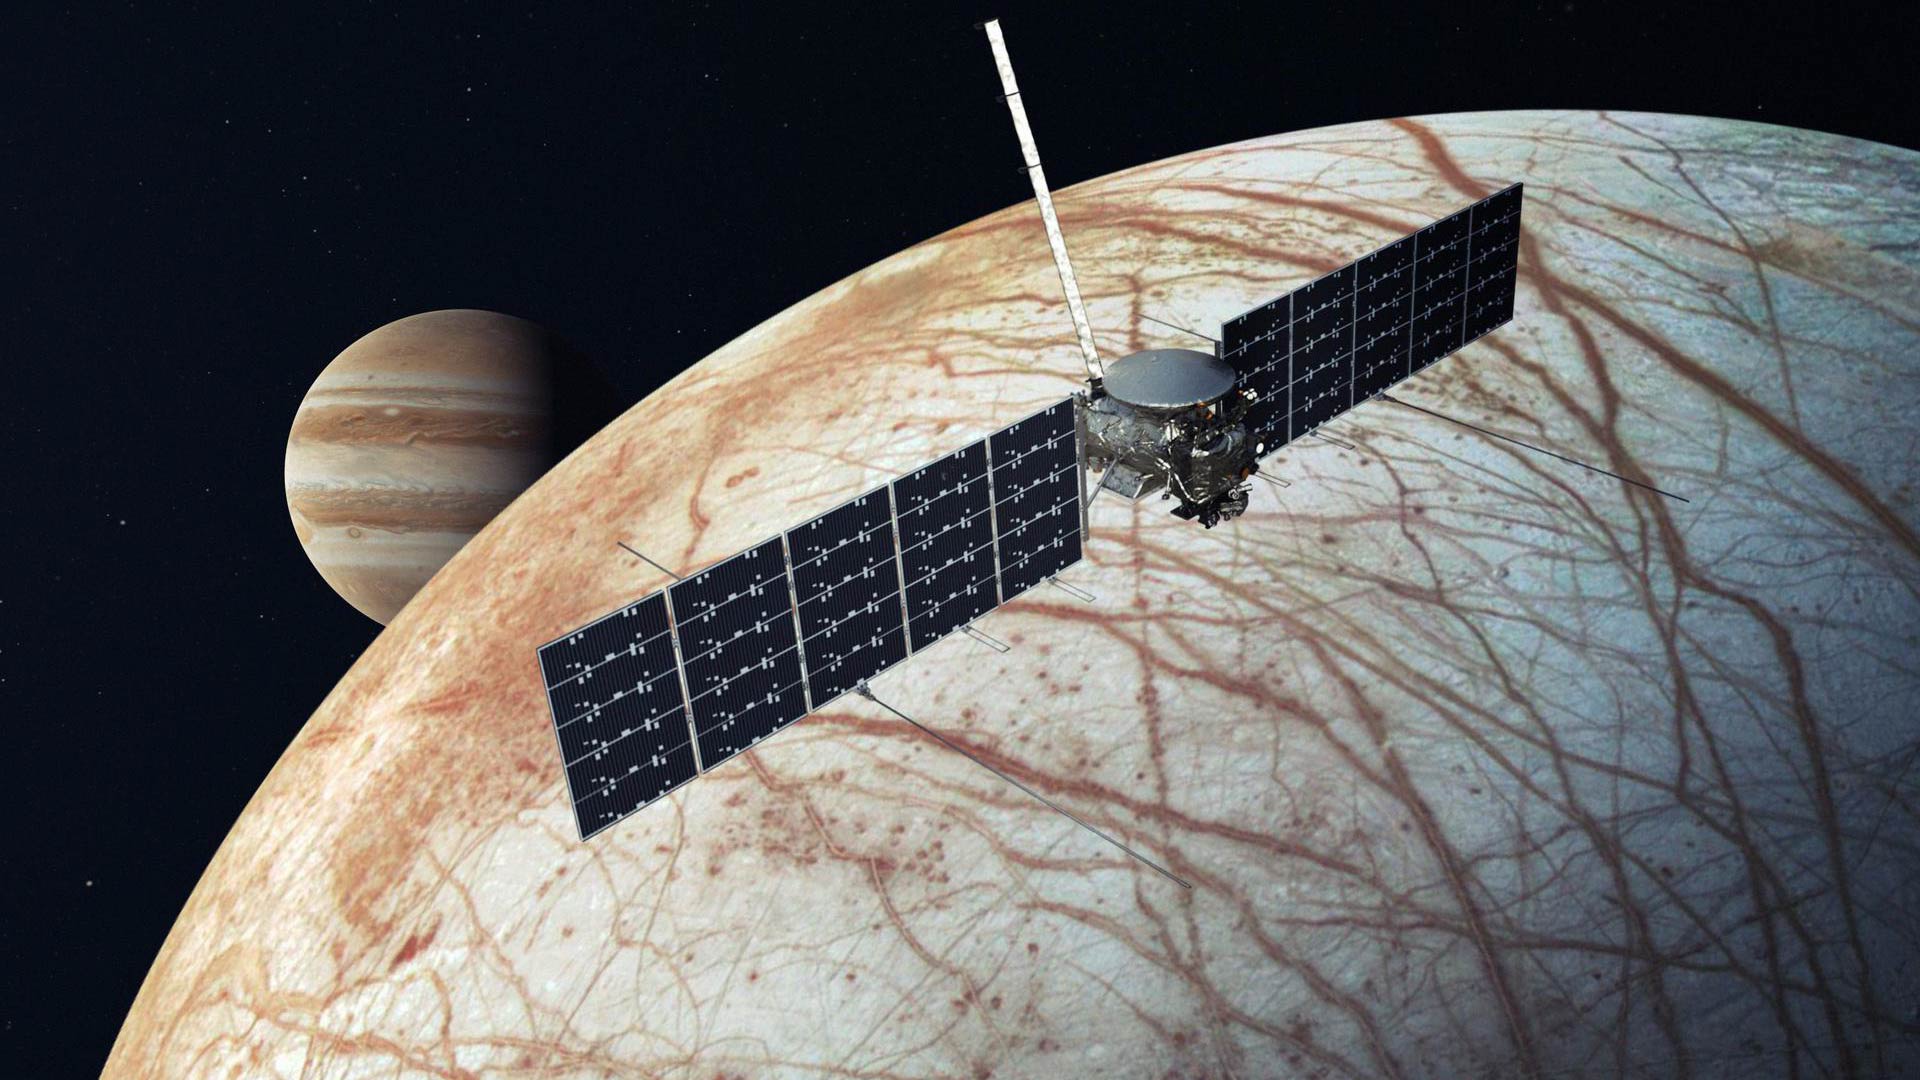 An image of the Europa clipper spacecraft. It has a small body with wide wings. Beneath it, Europa is tan and brown with a vein-like pattern.